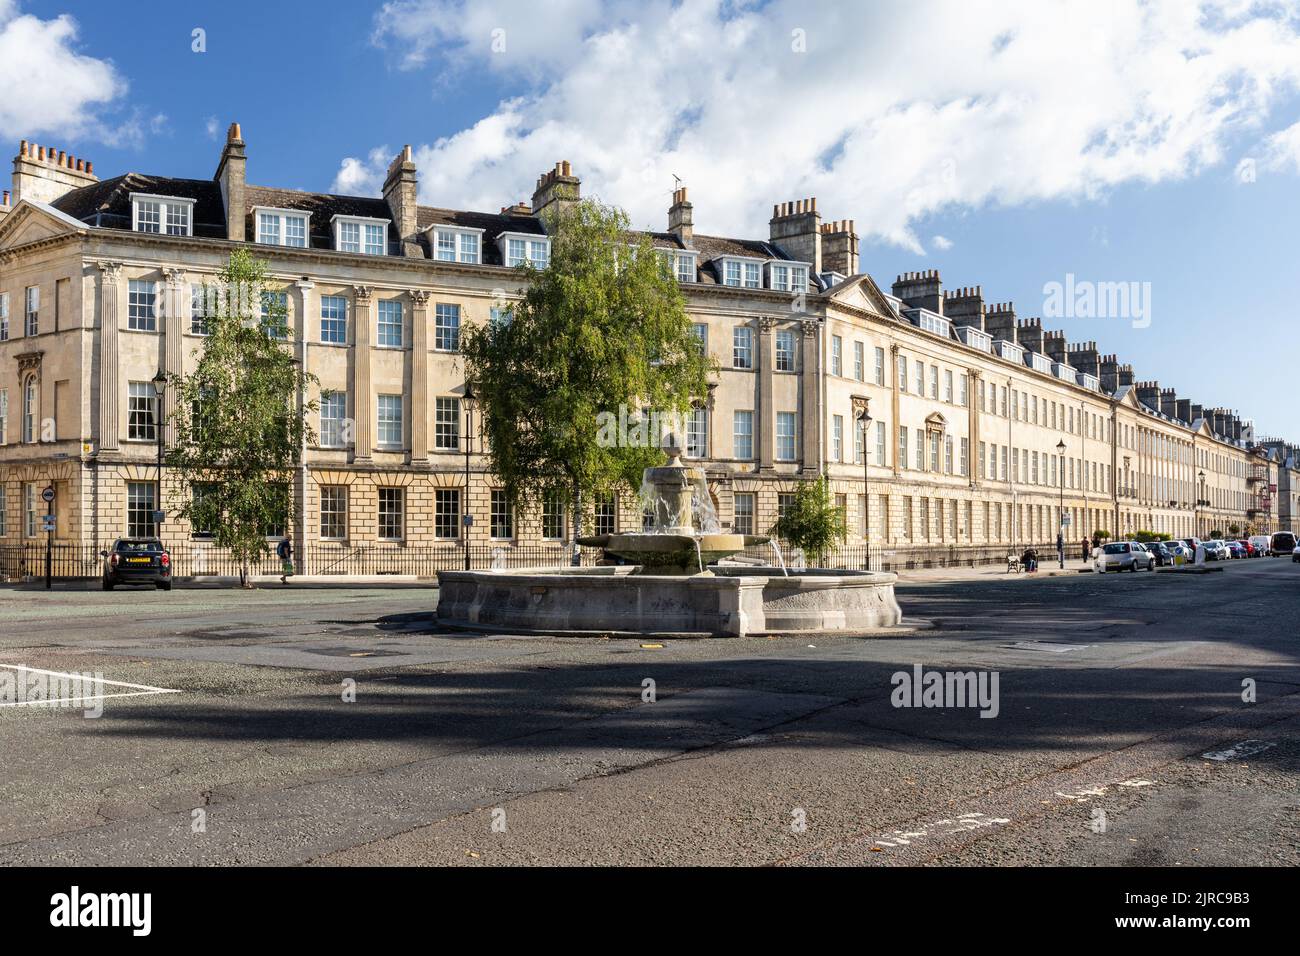 The Laura Place Fountain at the end of Great Pulteney Street and its terrace Georgian period townhouses, City of Bath, Somerset, England, UK Stock Photo